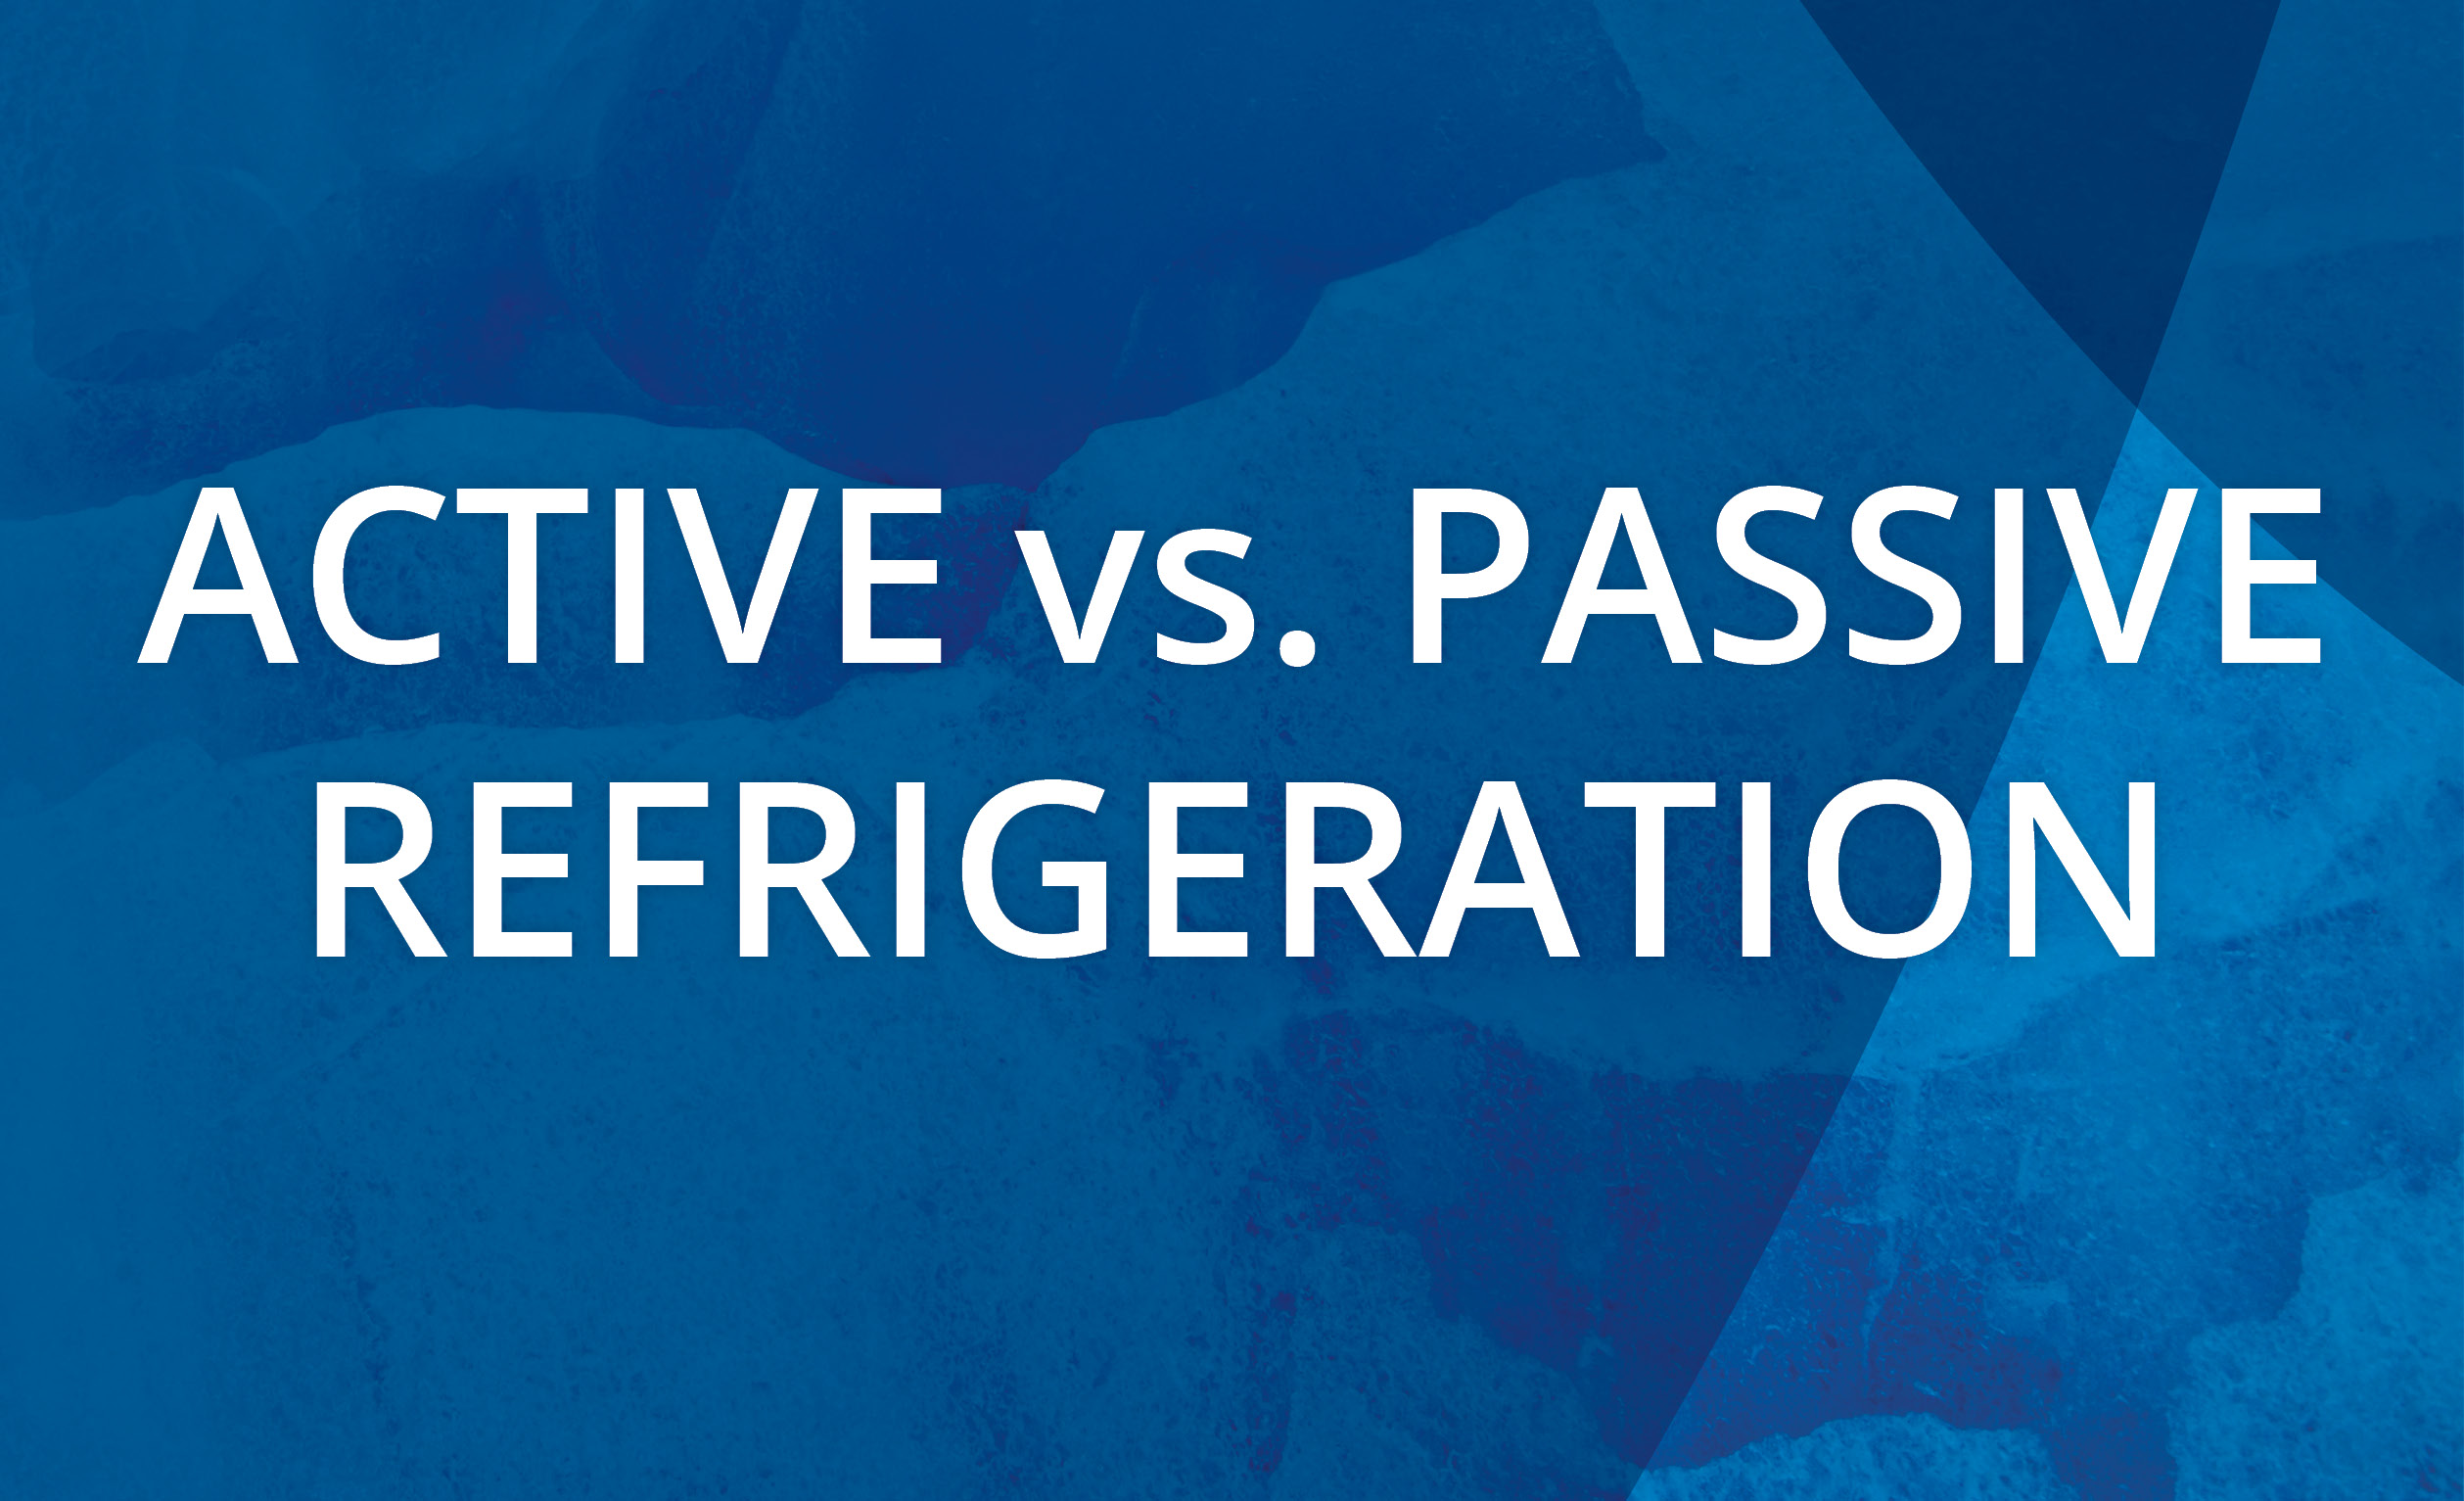 Learn more about active refrigeration vs. passive refrigeration